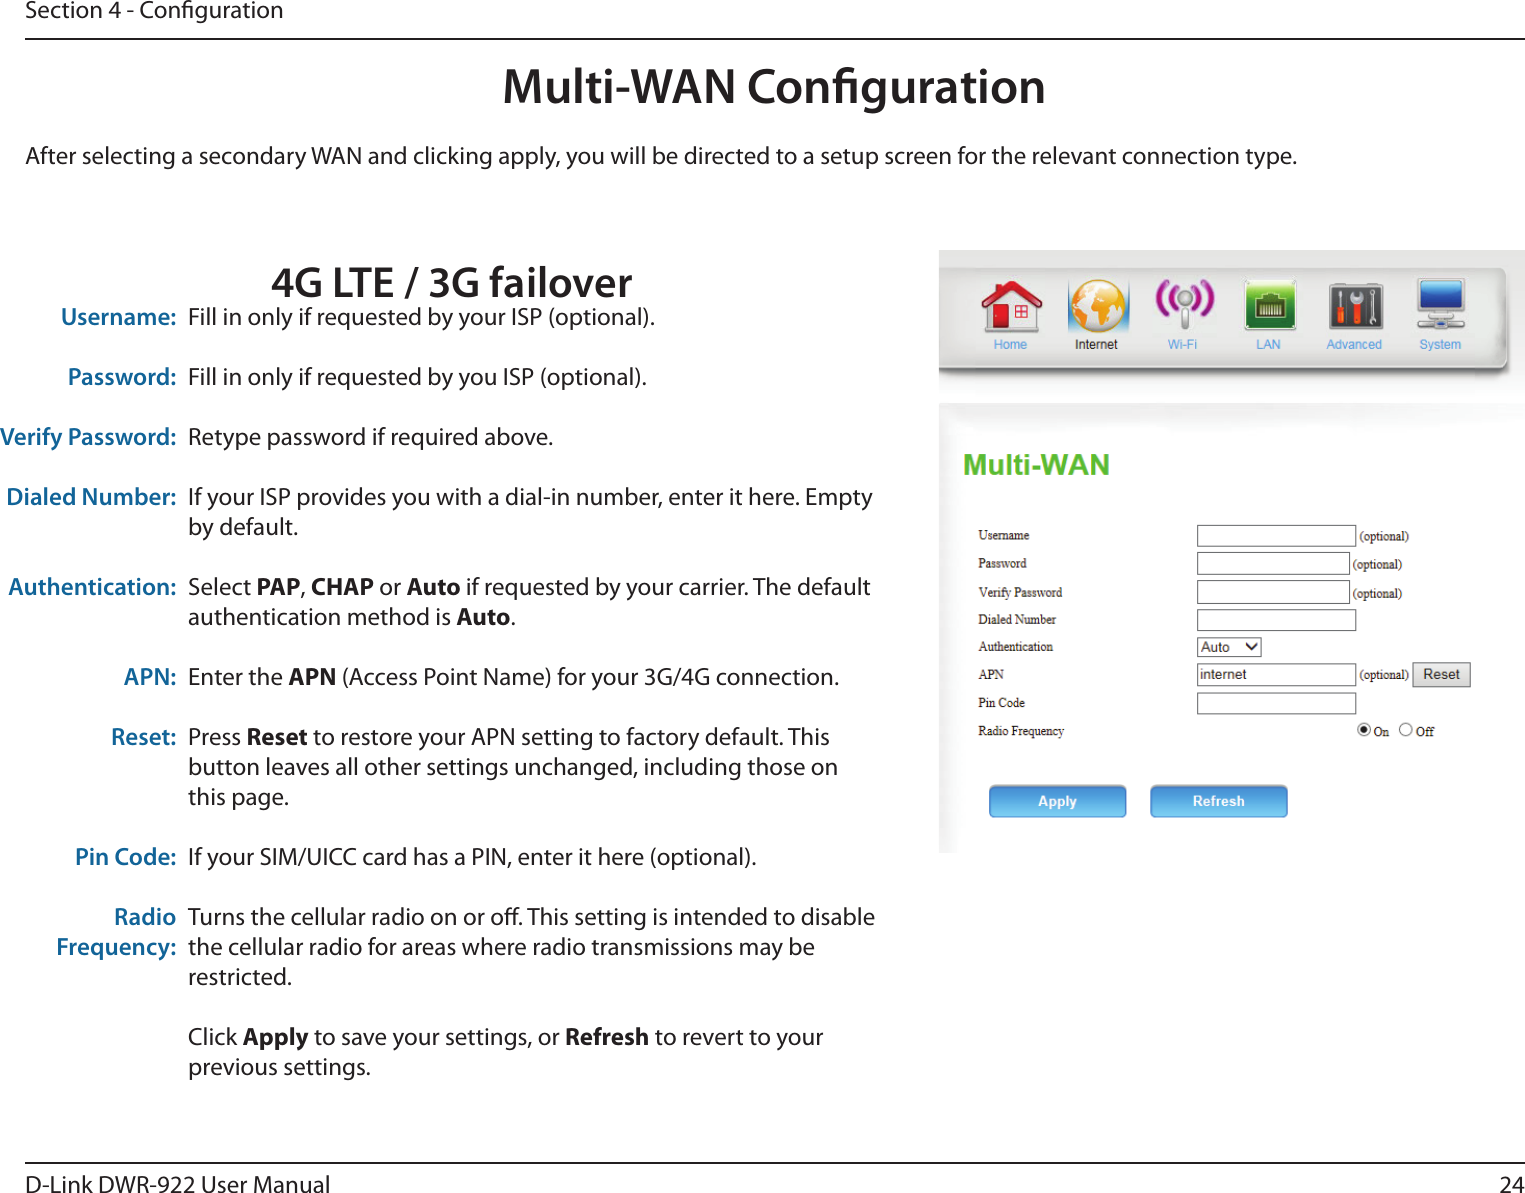 24D-Link DWR-922 User ManualSection 4 - CongurationMulti-WAN CongurationFill in only if requested by your ISP (optional).Fill in only if requested by you ISP (optional).Retype password if required above.If your ISP provides you with a dial-in number, enter it here. Empty by default.Select PAP, CHAP or Auto if requested by your carrier. The default authentication method is Auto.Enter the APN (Access Point Name) for your 3G/4G connection.Press Reset to restore your APN setting to factory default. This button leaves all other settings unchanged, including those on this page.If your SIM/UICC card has a PIN, enter it here (optional).Turns the cellular radio on or o. This setting is intended to disable the cellular radio for areas where radio transmissions may be restricted.Click Apply to save your settings, or Refresh to revert to your previous settings.Username:Password:Verify Password:Dialed Number:Authentication:APN:Reset:Pin Code:Radio Frequency:After selecting a secondary WAN and clicking apply, you will be directed to a setup screen for the relevant connection type.4G LTE / 3G failover